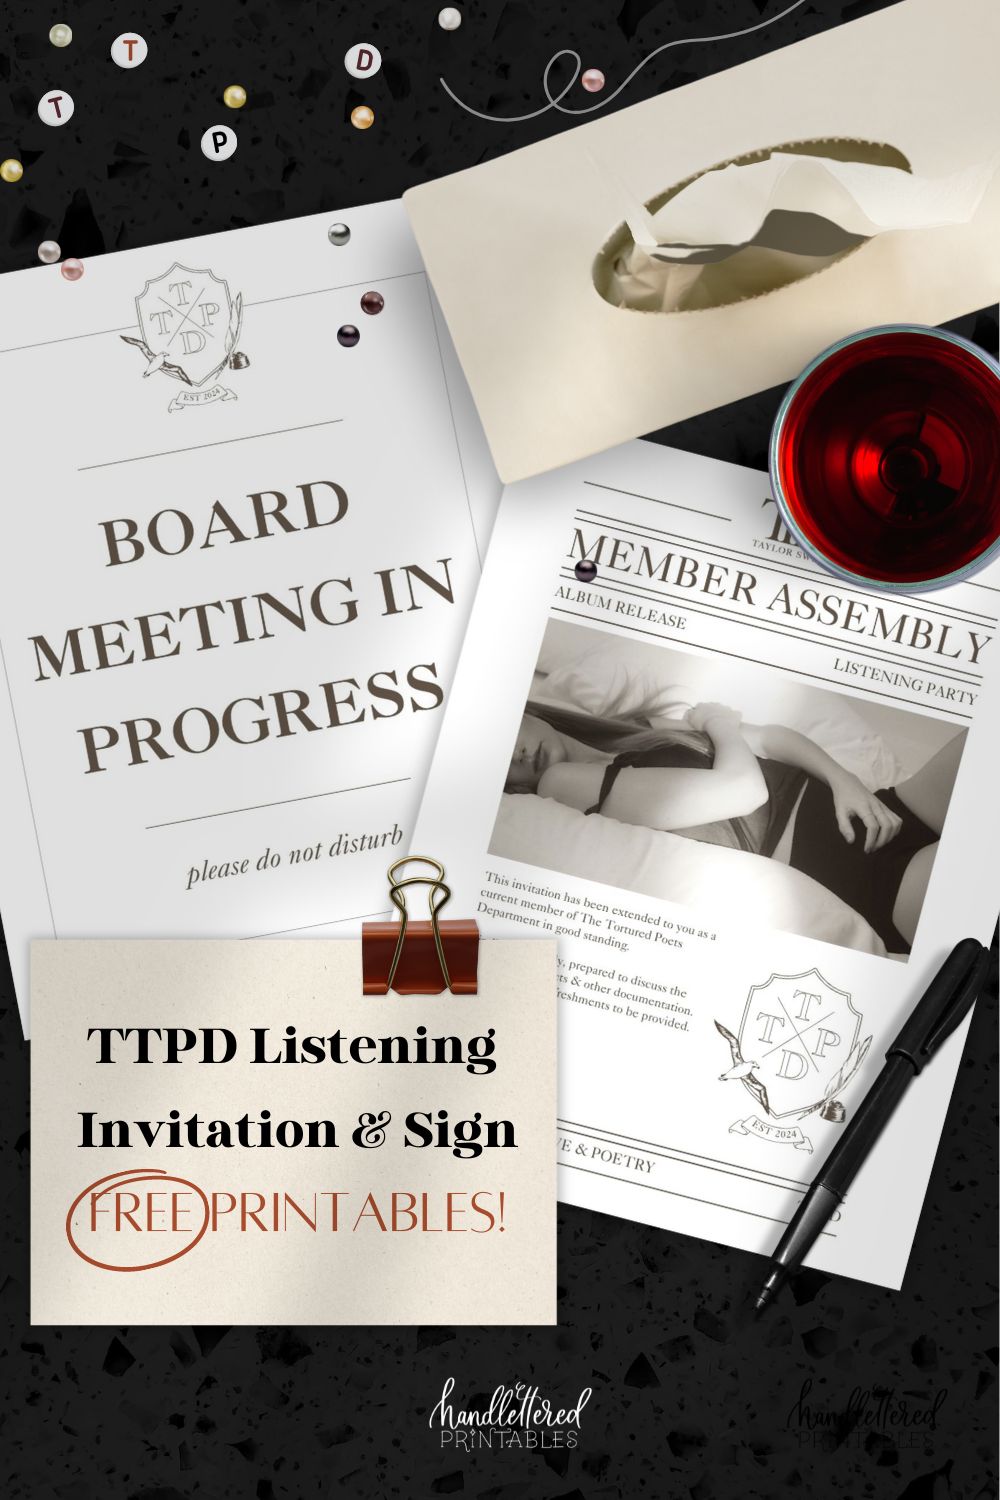 image of TTPD Listening Party Invitation and Signage on a dark countertop with friendship bracelet beads, box of tissues, glass of red wine and pen. note card with binder clip reads: TTPD Listening Invitation and Sign Free Printables